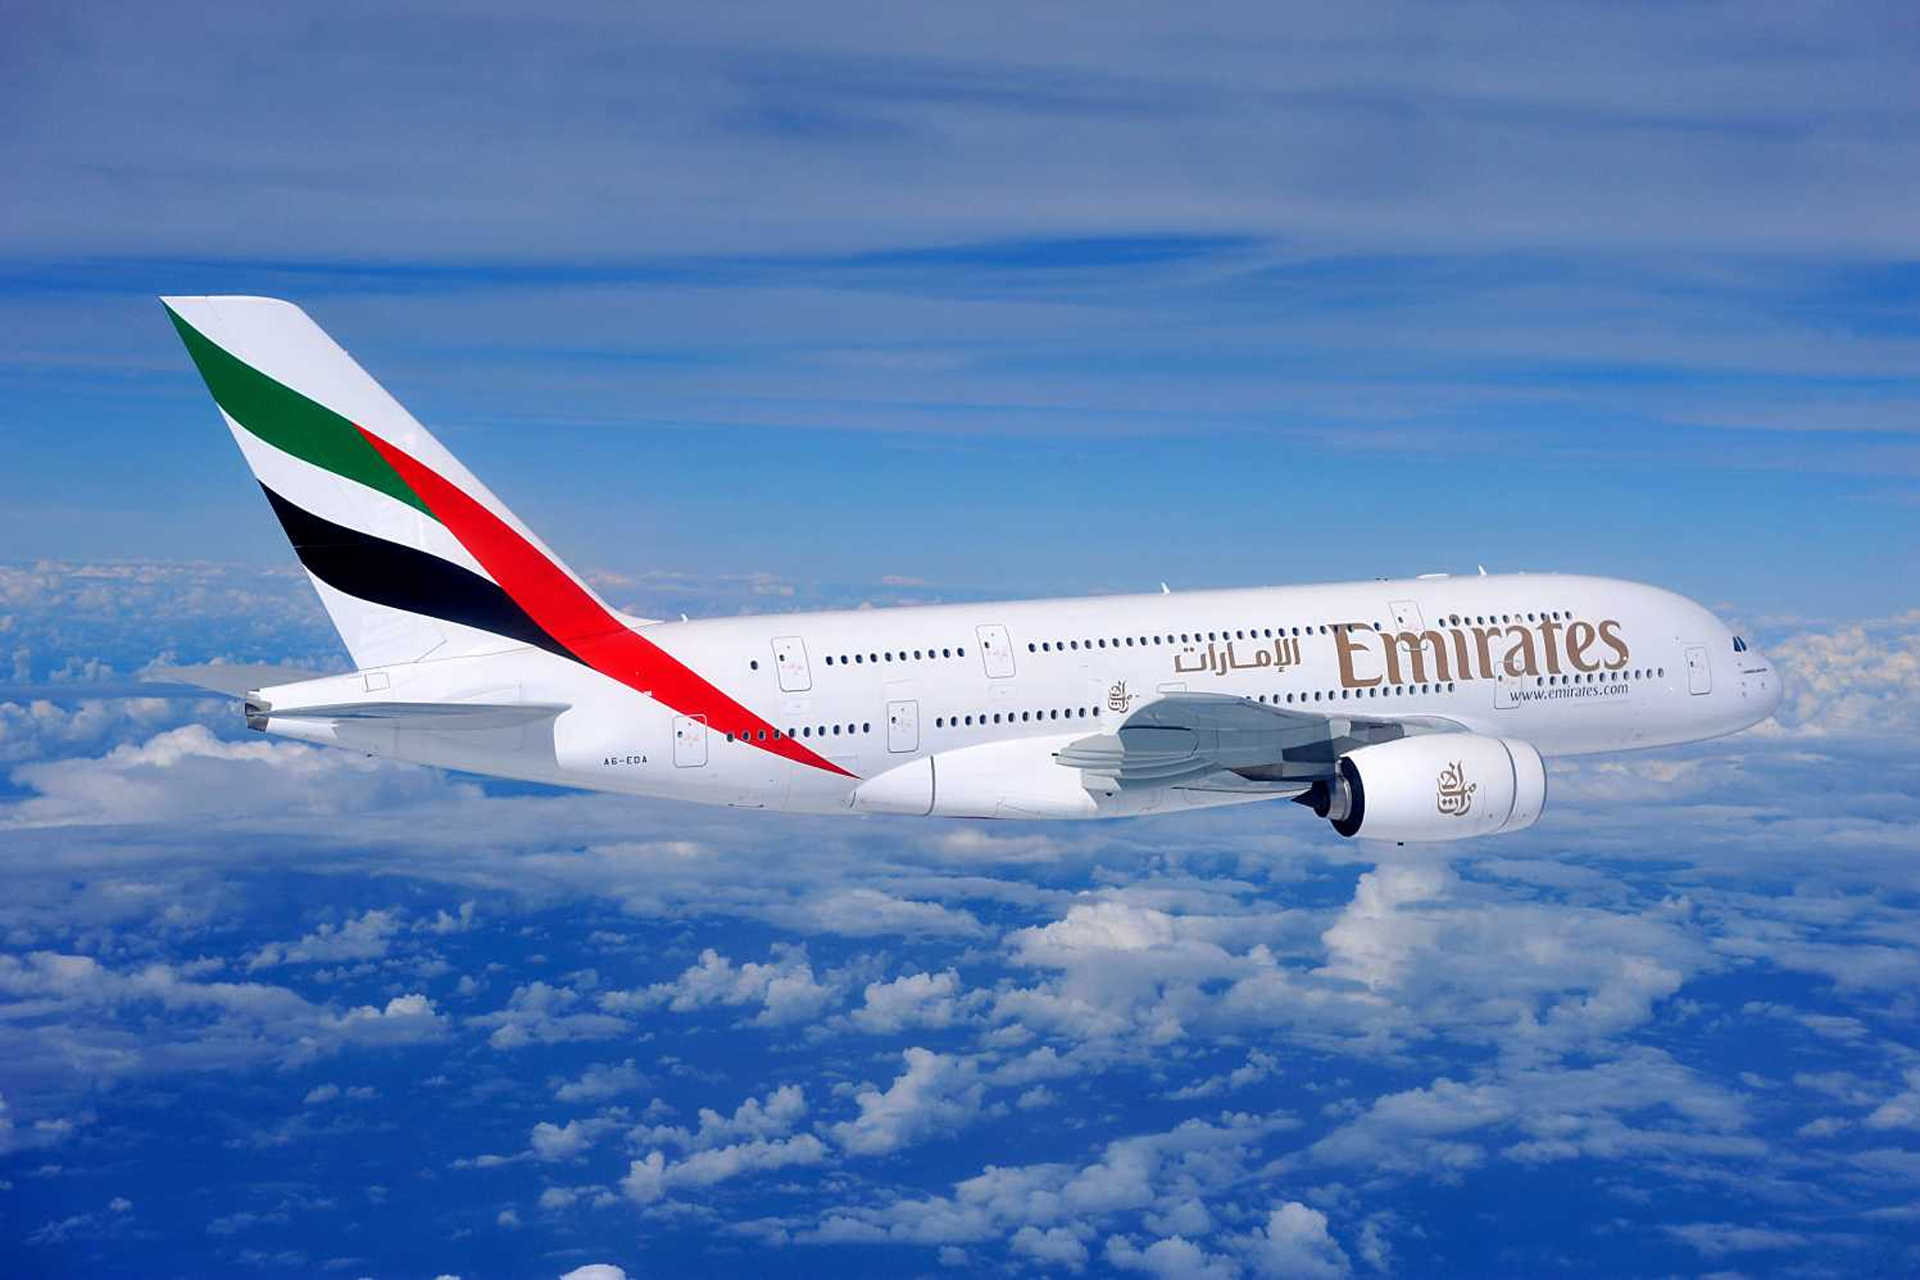 Emirates announces huge sale on Business and First Class fares | News